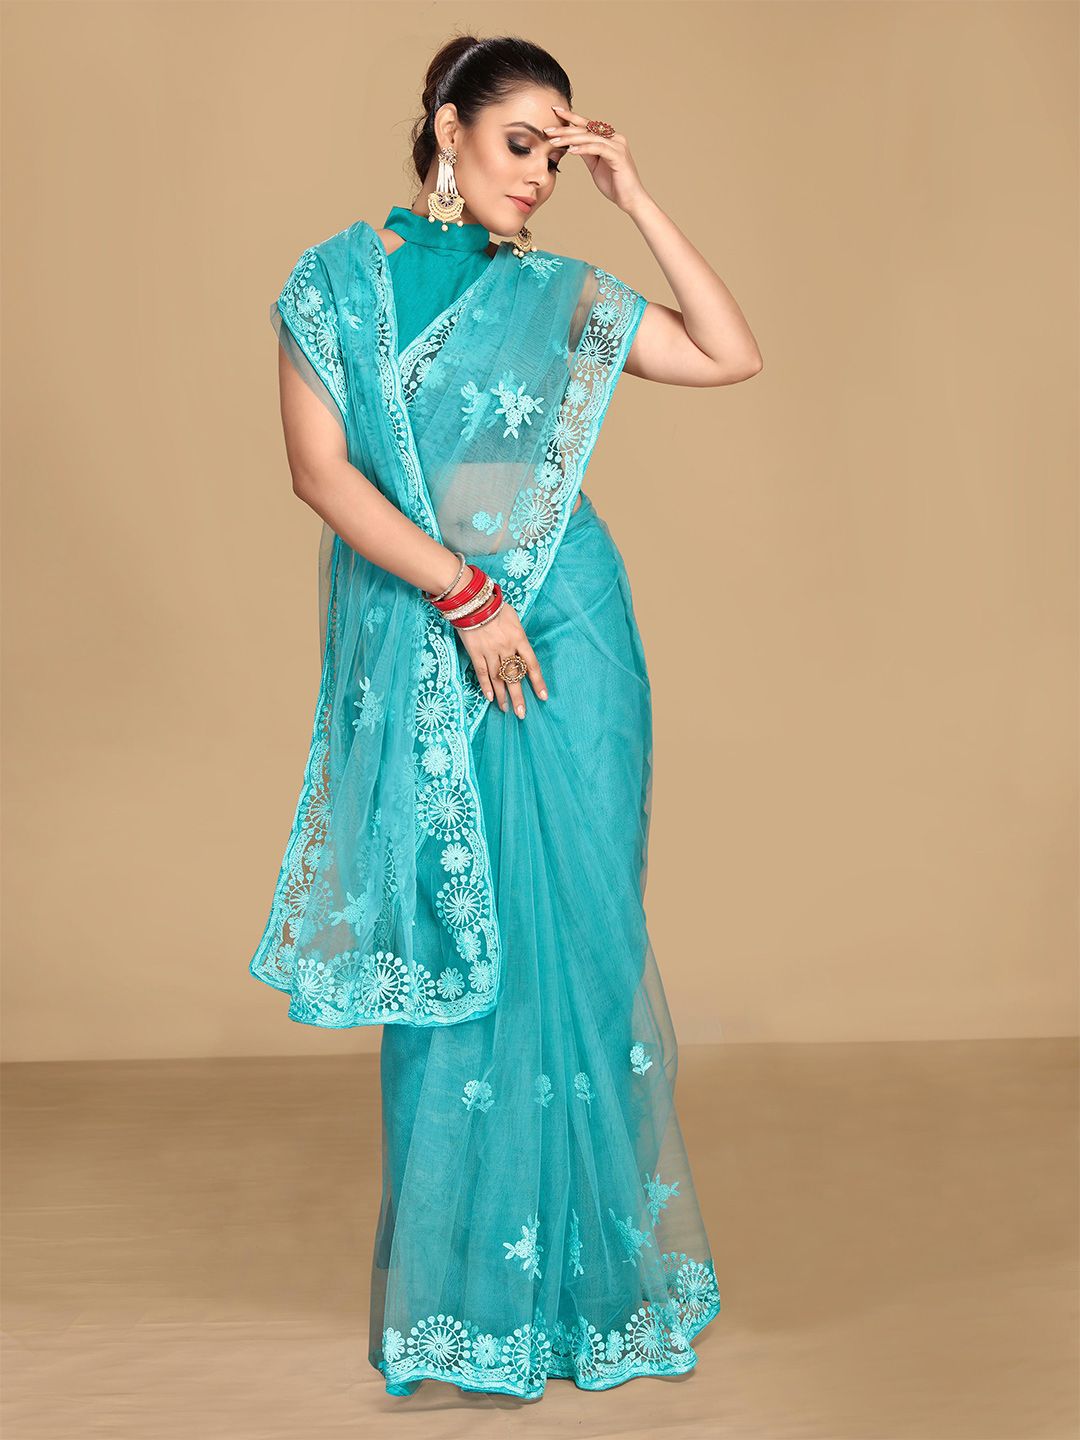 VAIRAGEE Women Turquoise Blue Ethnic Motifs Embroidered Net Saree Price in India